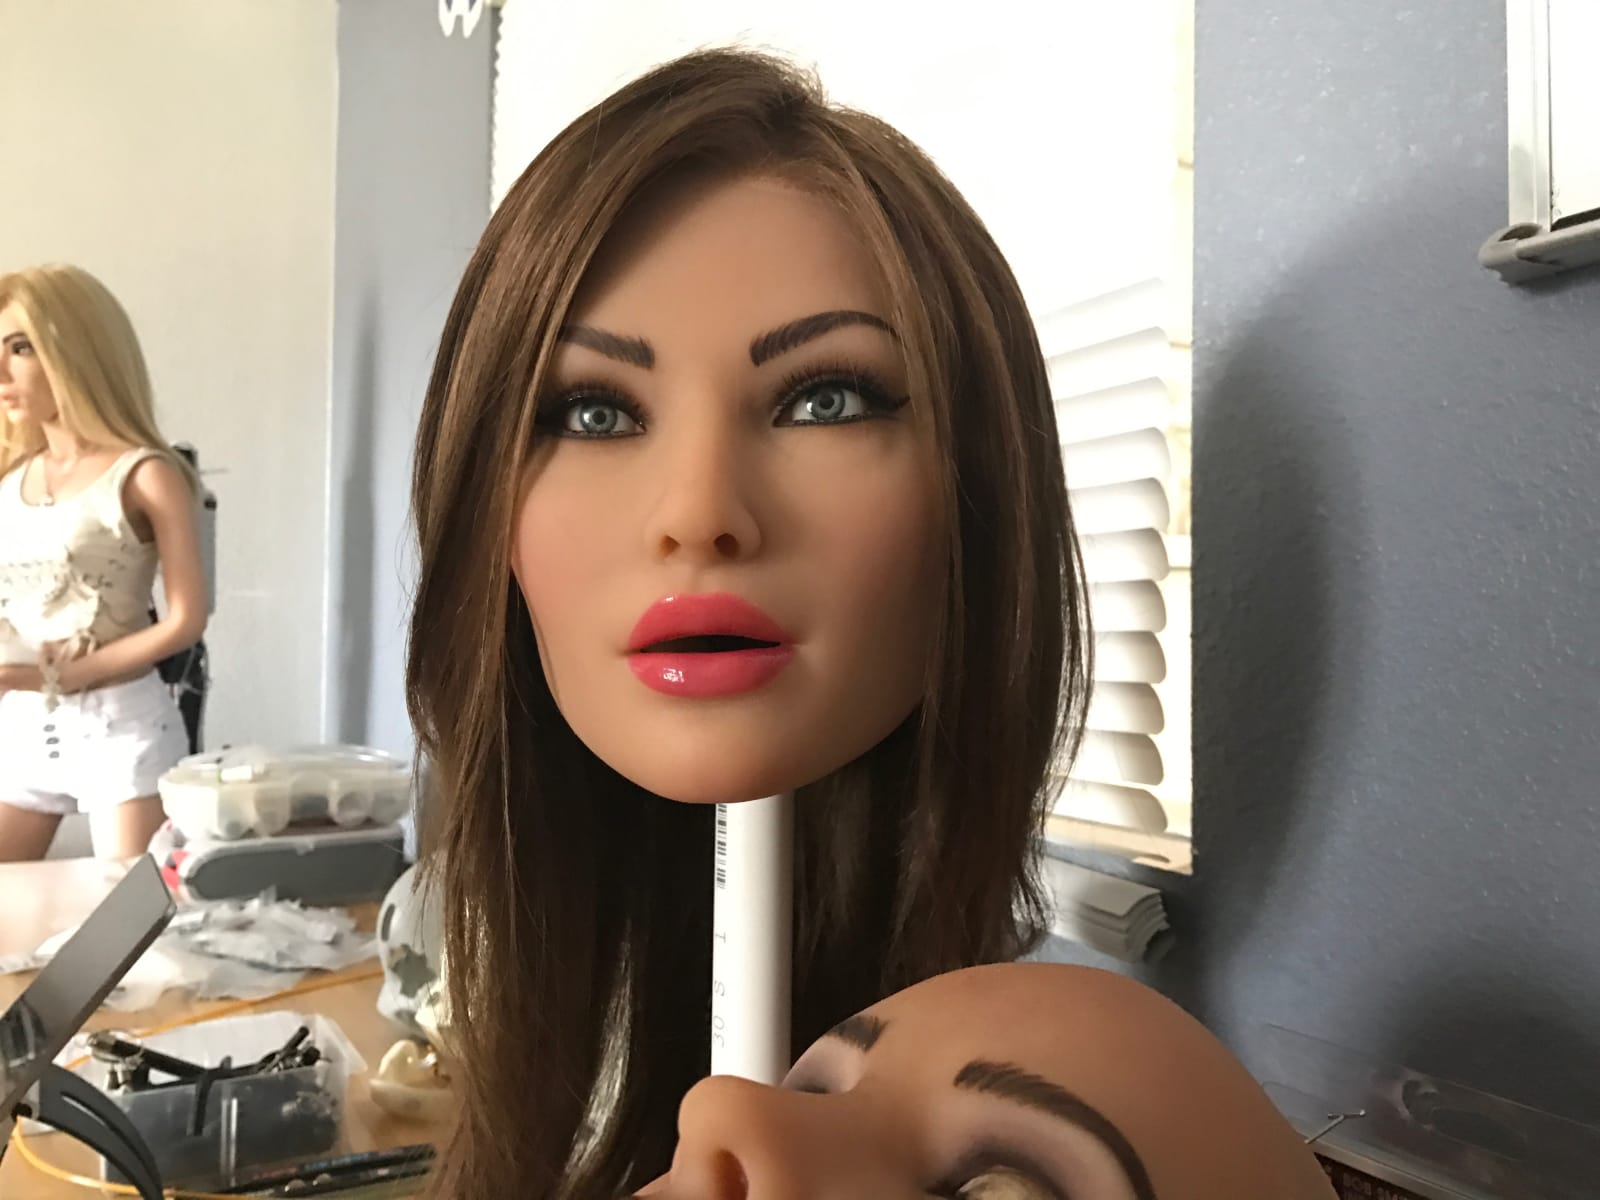 RealDoll's first sex robot took me to the uncanny valley | Engadget